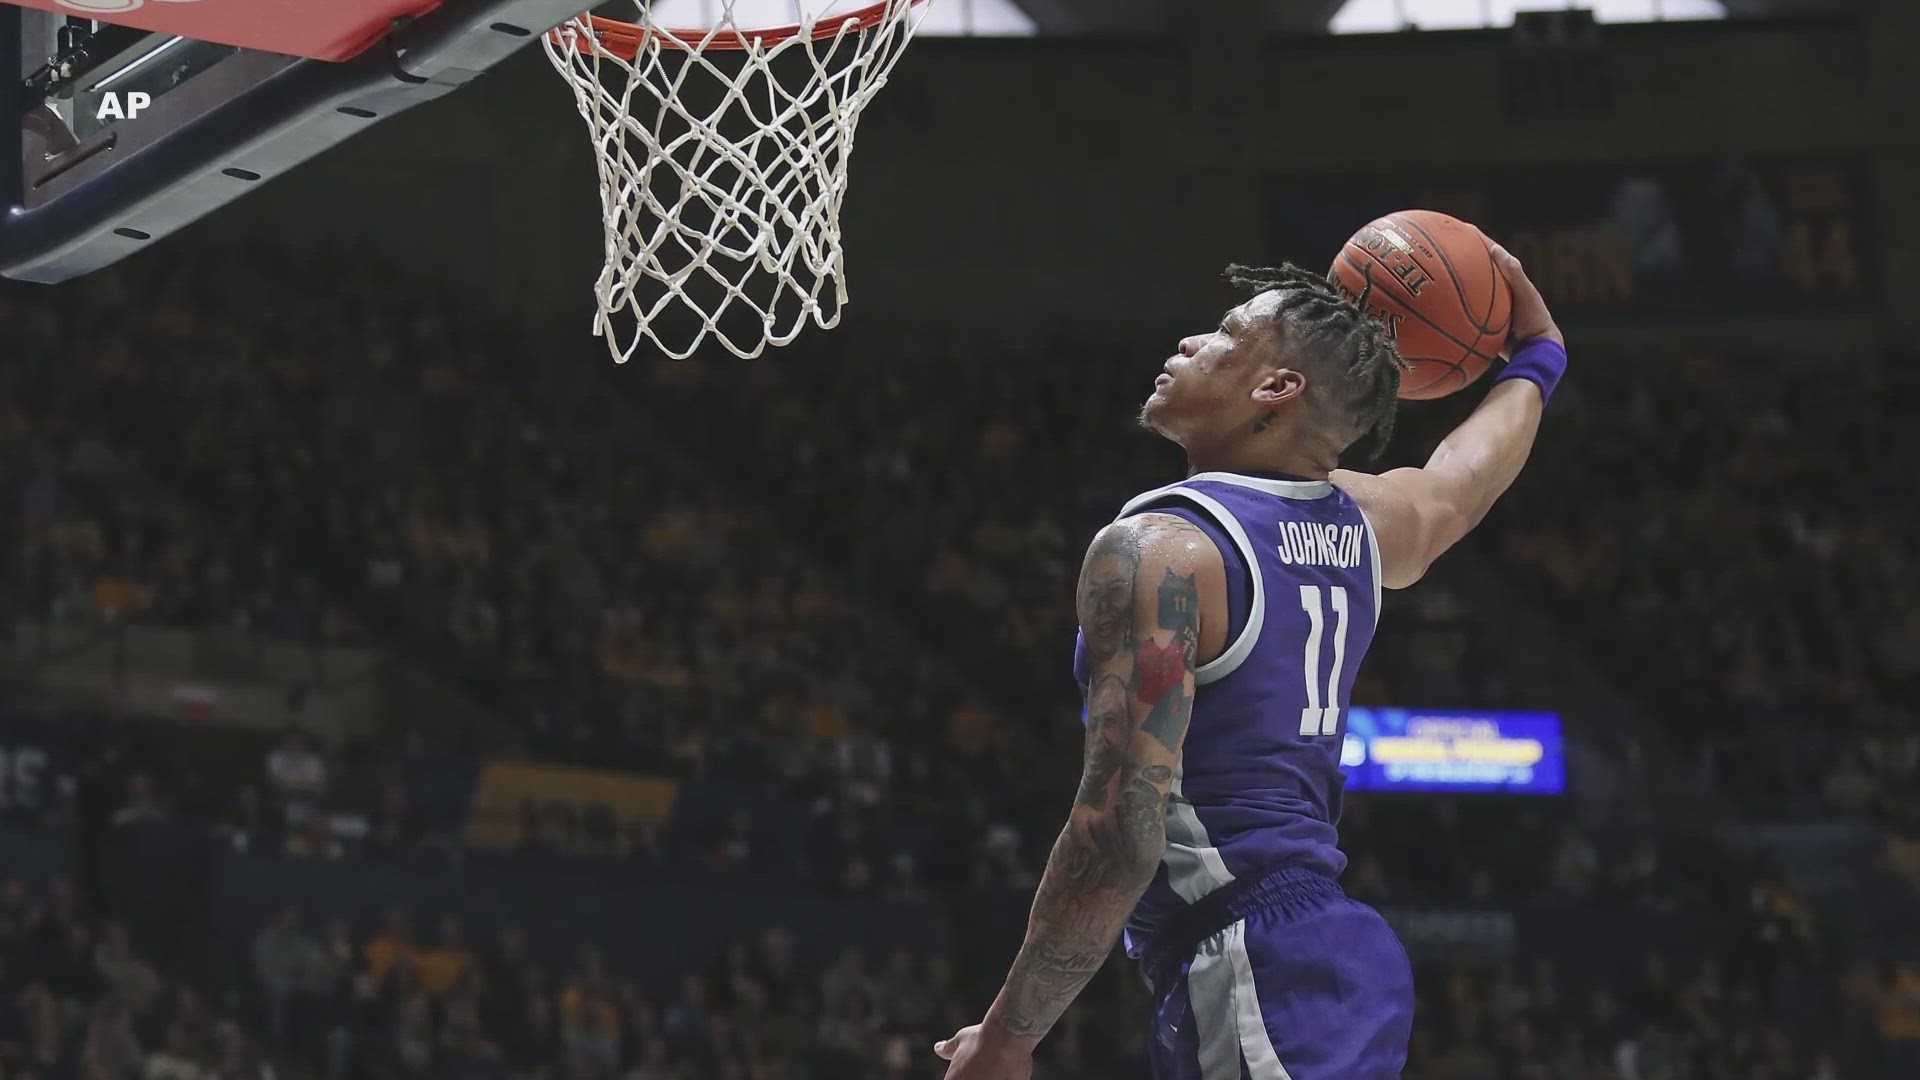 Kansas State's star made an unthinkable decision to keep his basketball career alive.